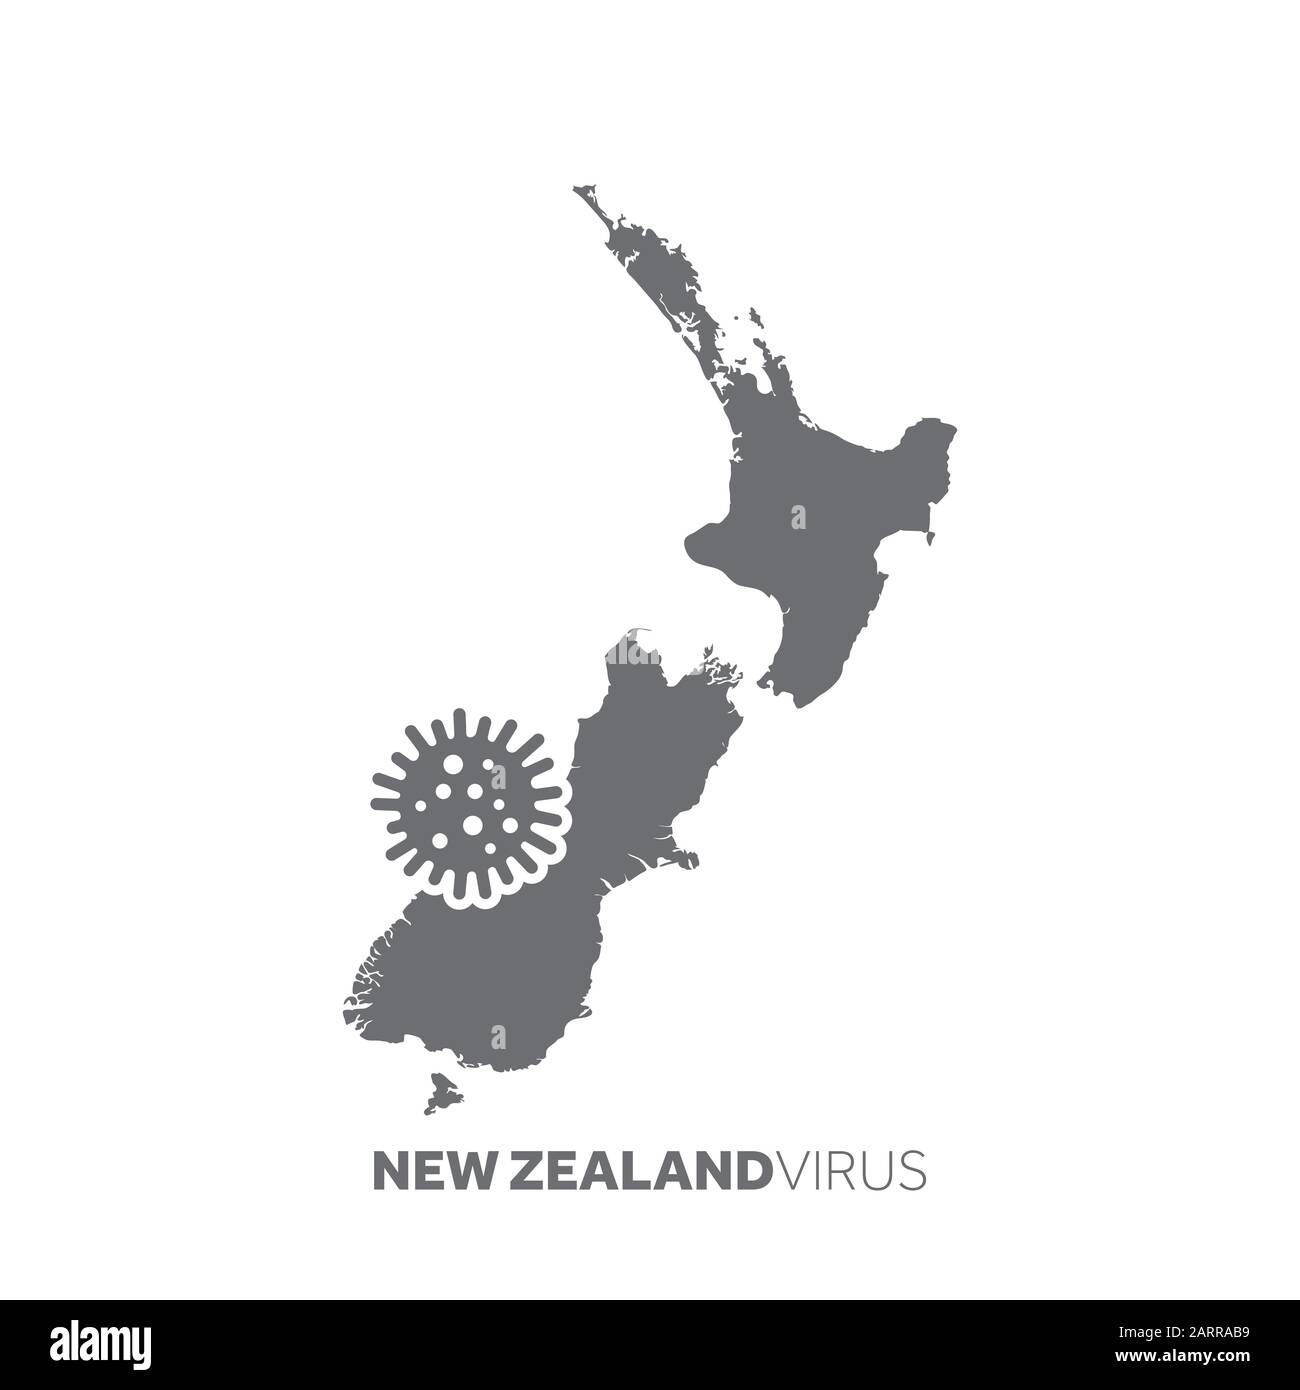 New Zealand map with a virus microbe. Illness and disease outbreak Stock Vector